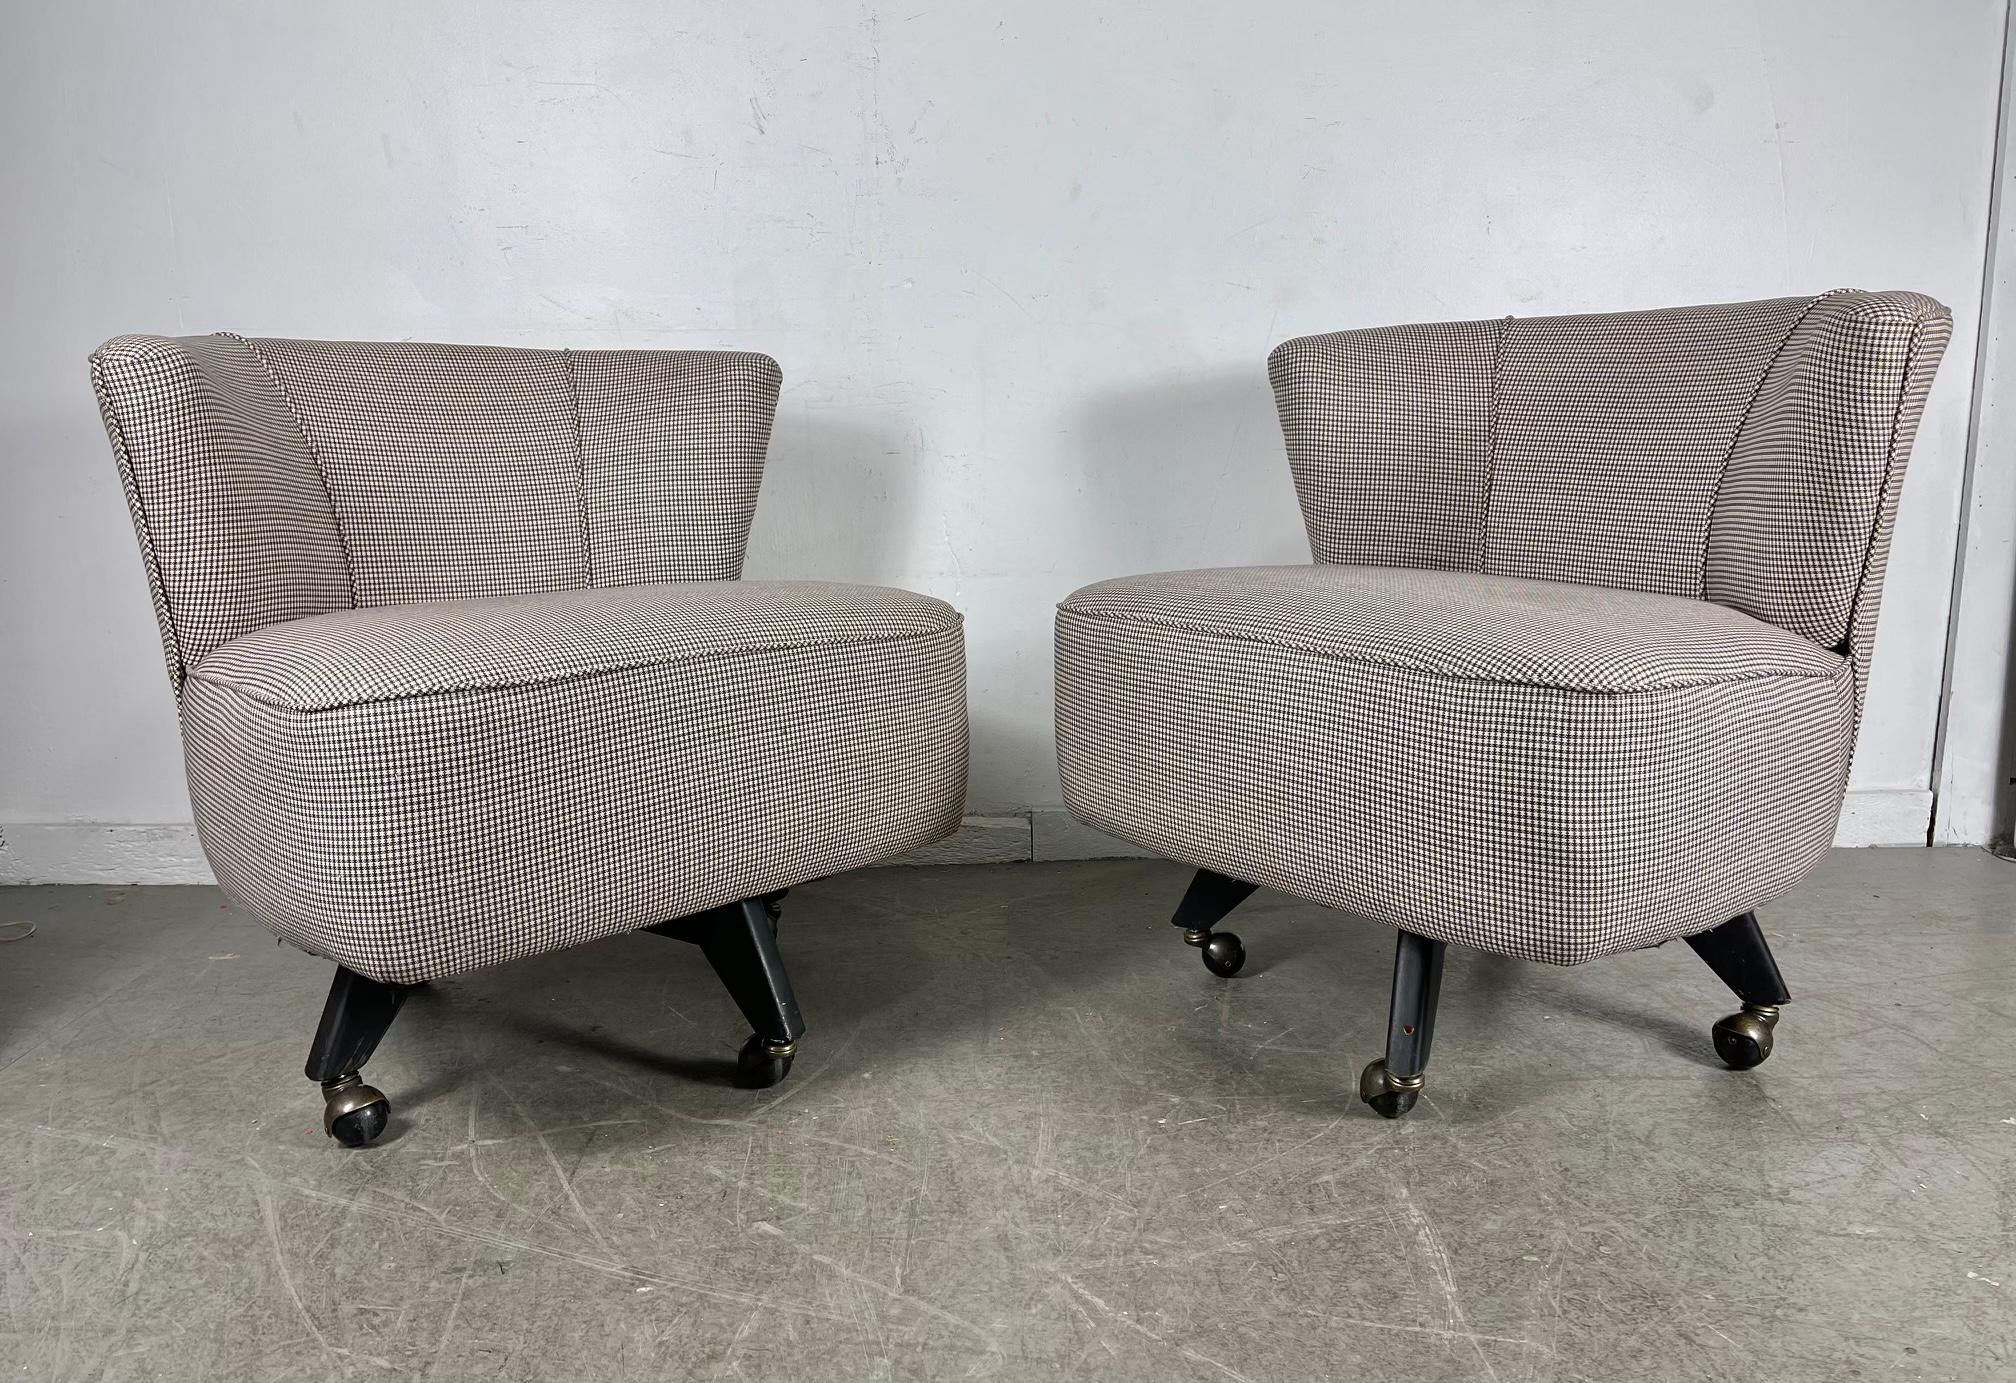 Classic Pair Mid-Century Modern Swivel Chairs on castors, , attrib to Selig For Sale 1